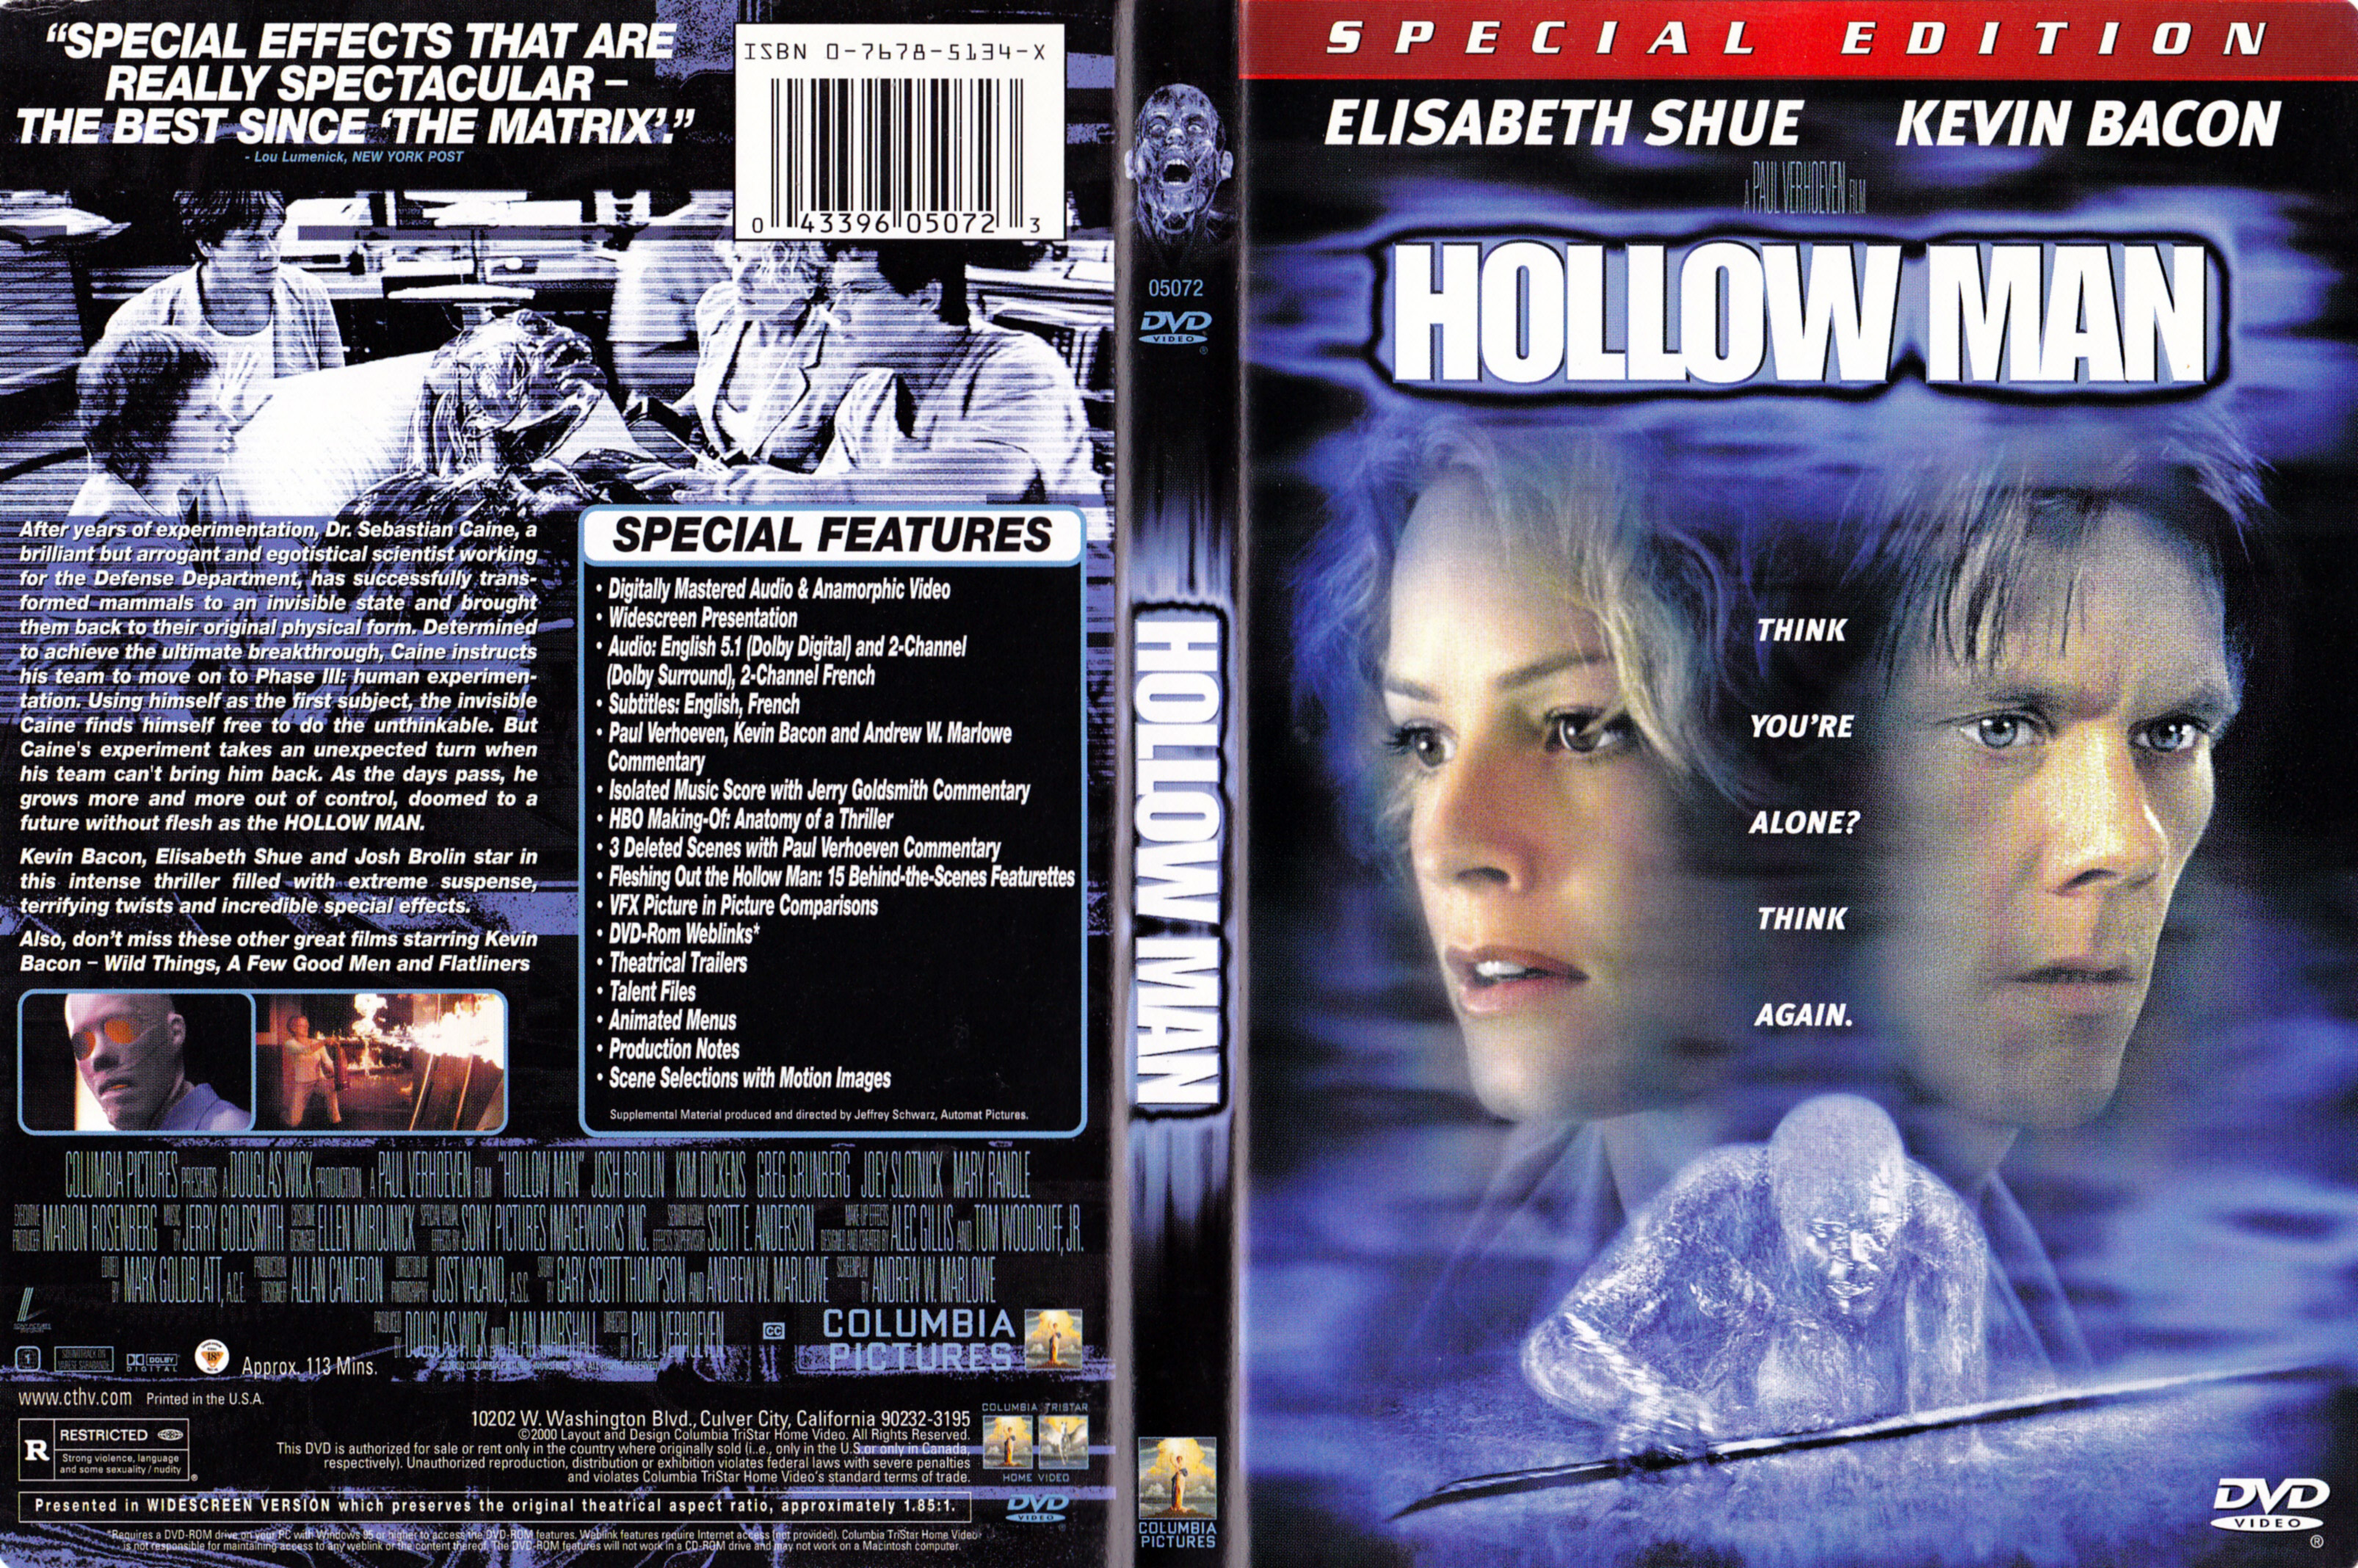 Jaquette DVD Hollow man (Canadienne)